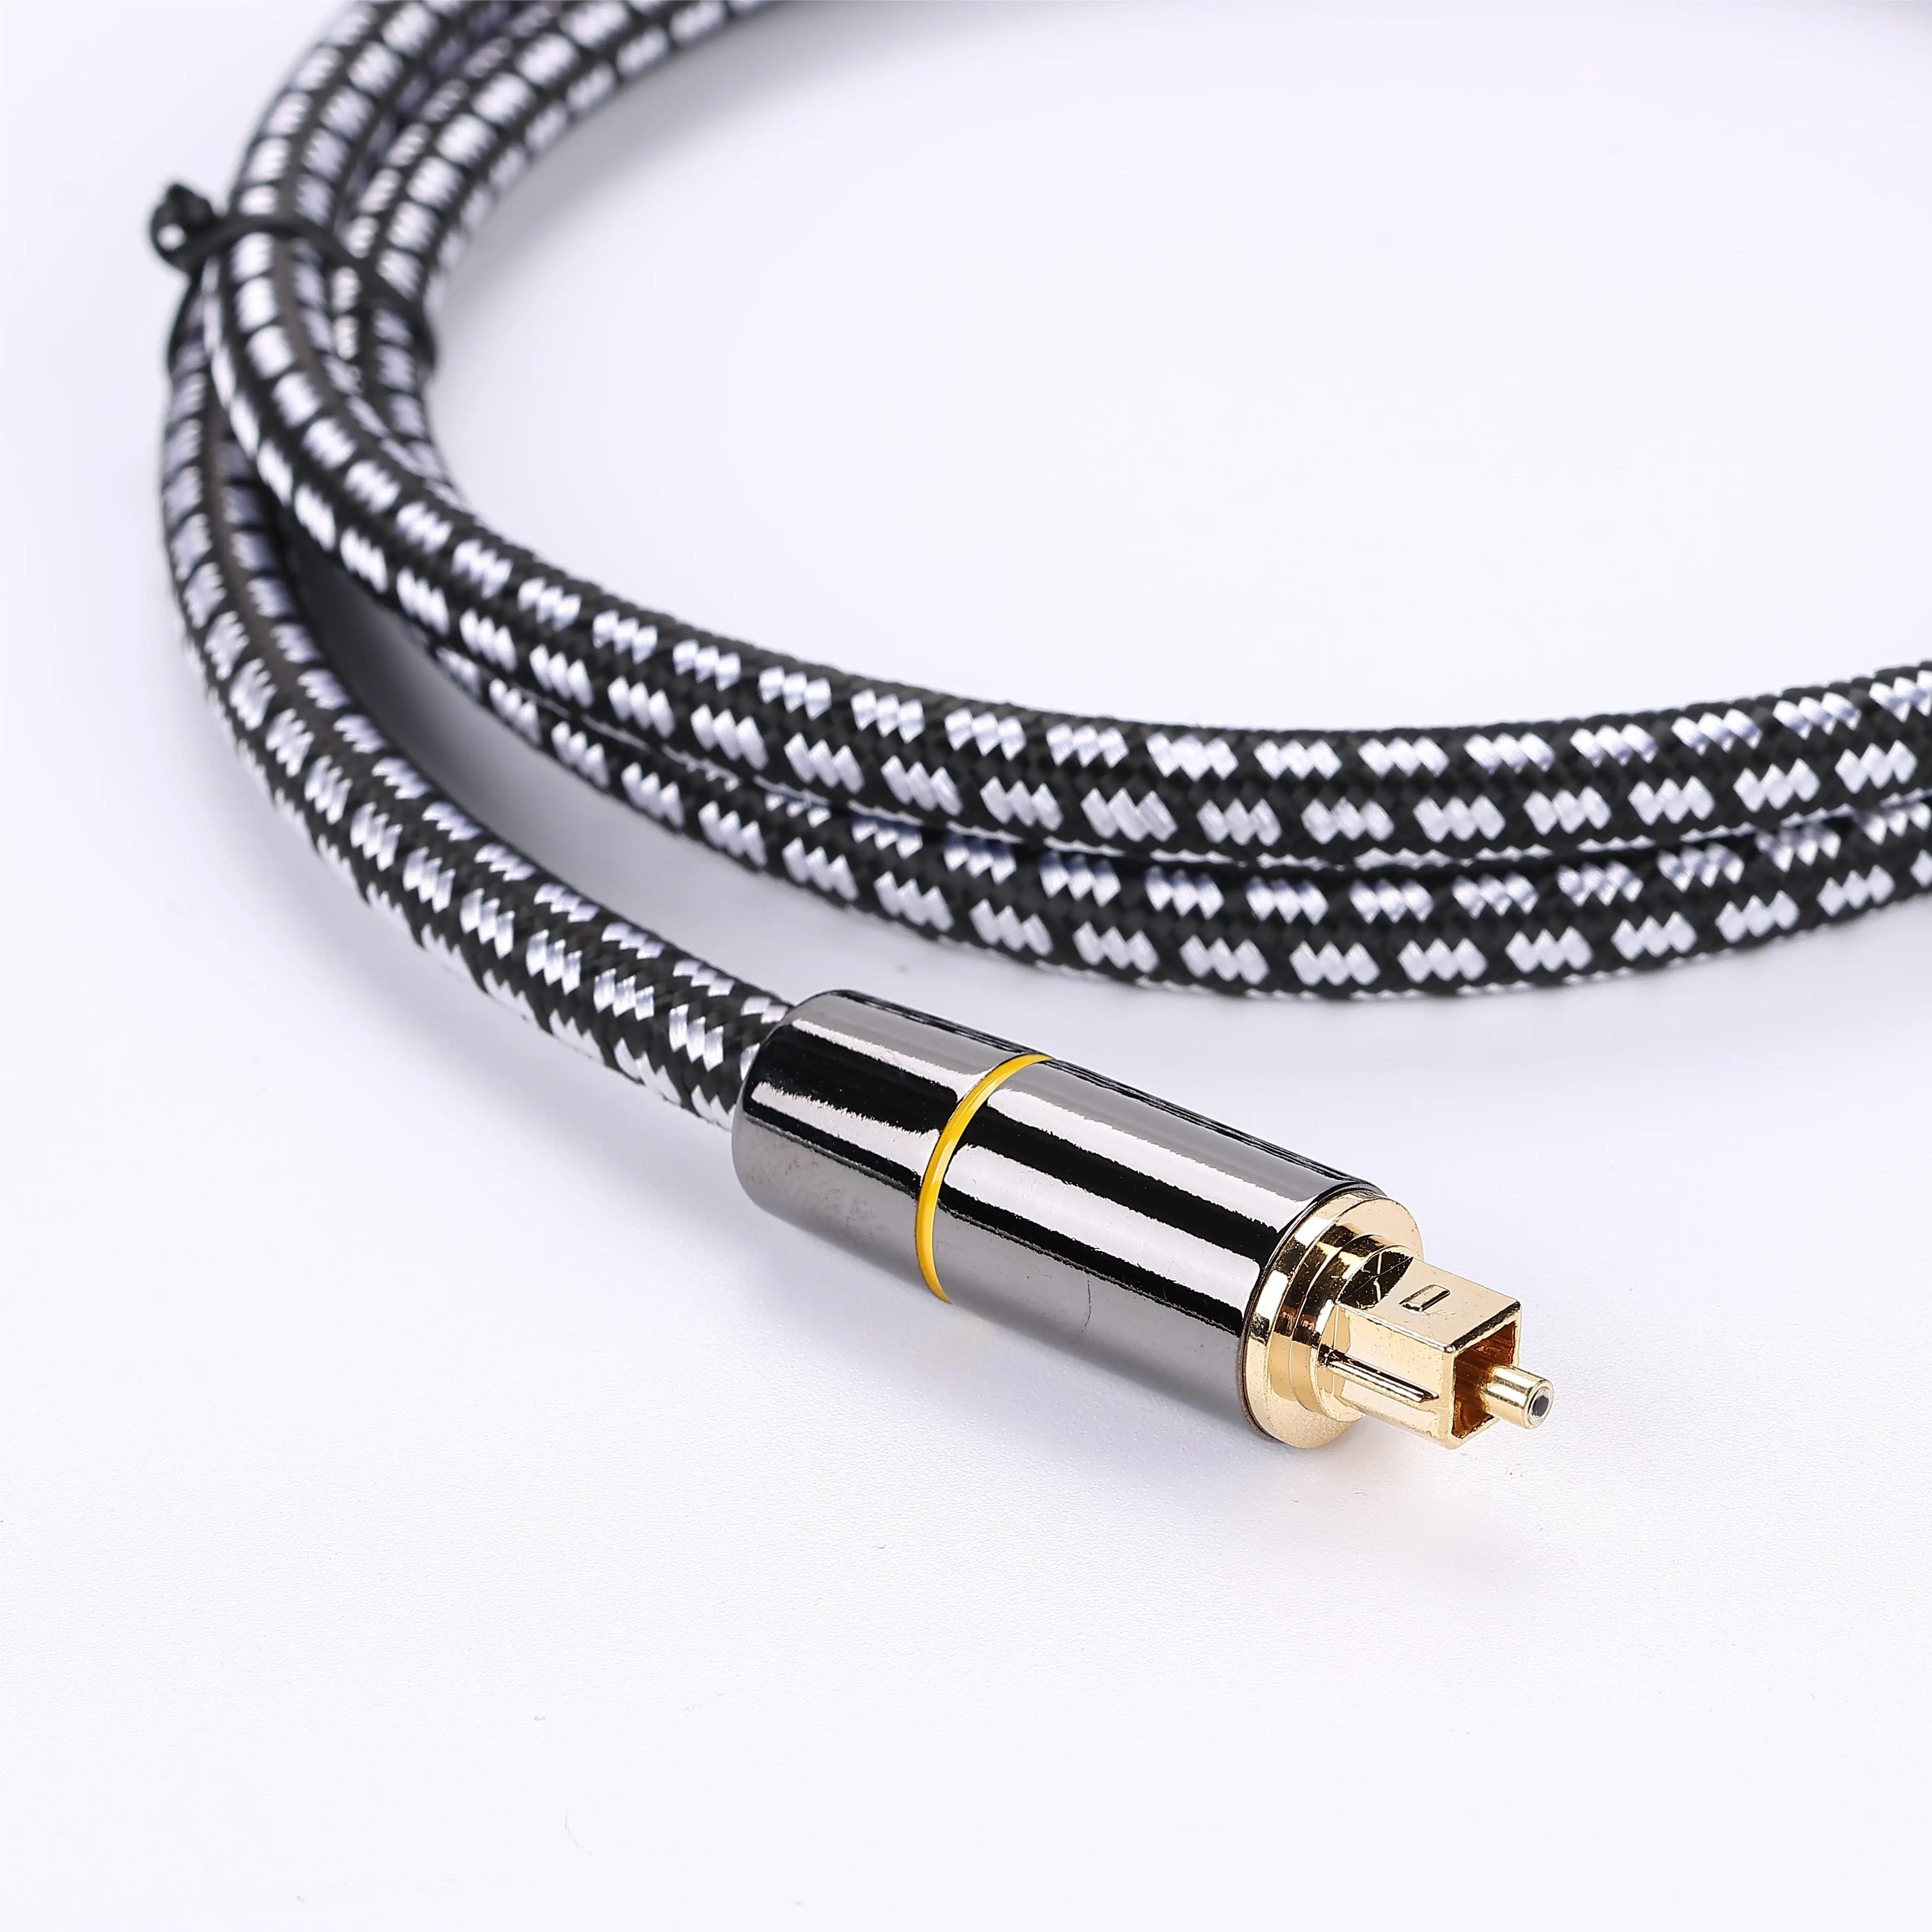 Digital Optical Audio Cable Toslink Male to Male Digital Optical Cable Plated for Home Theater TV